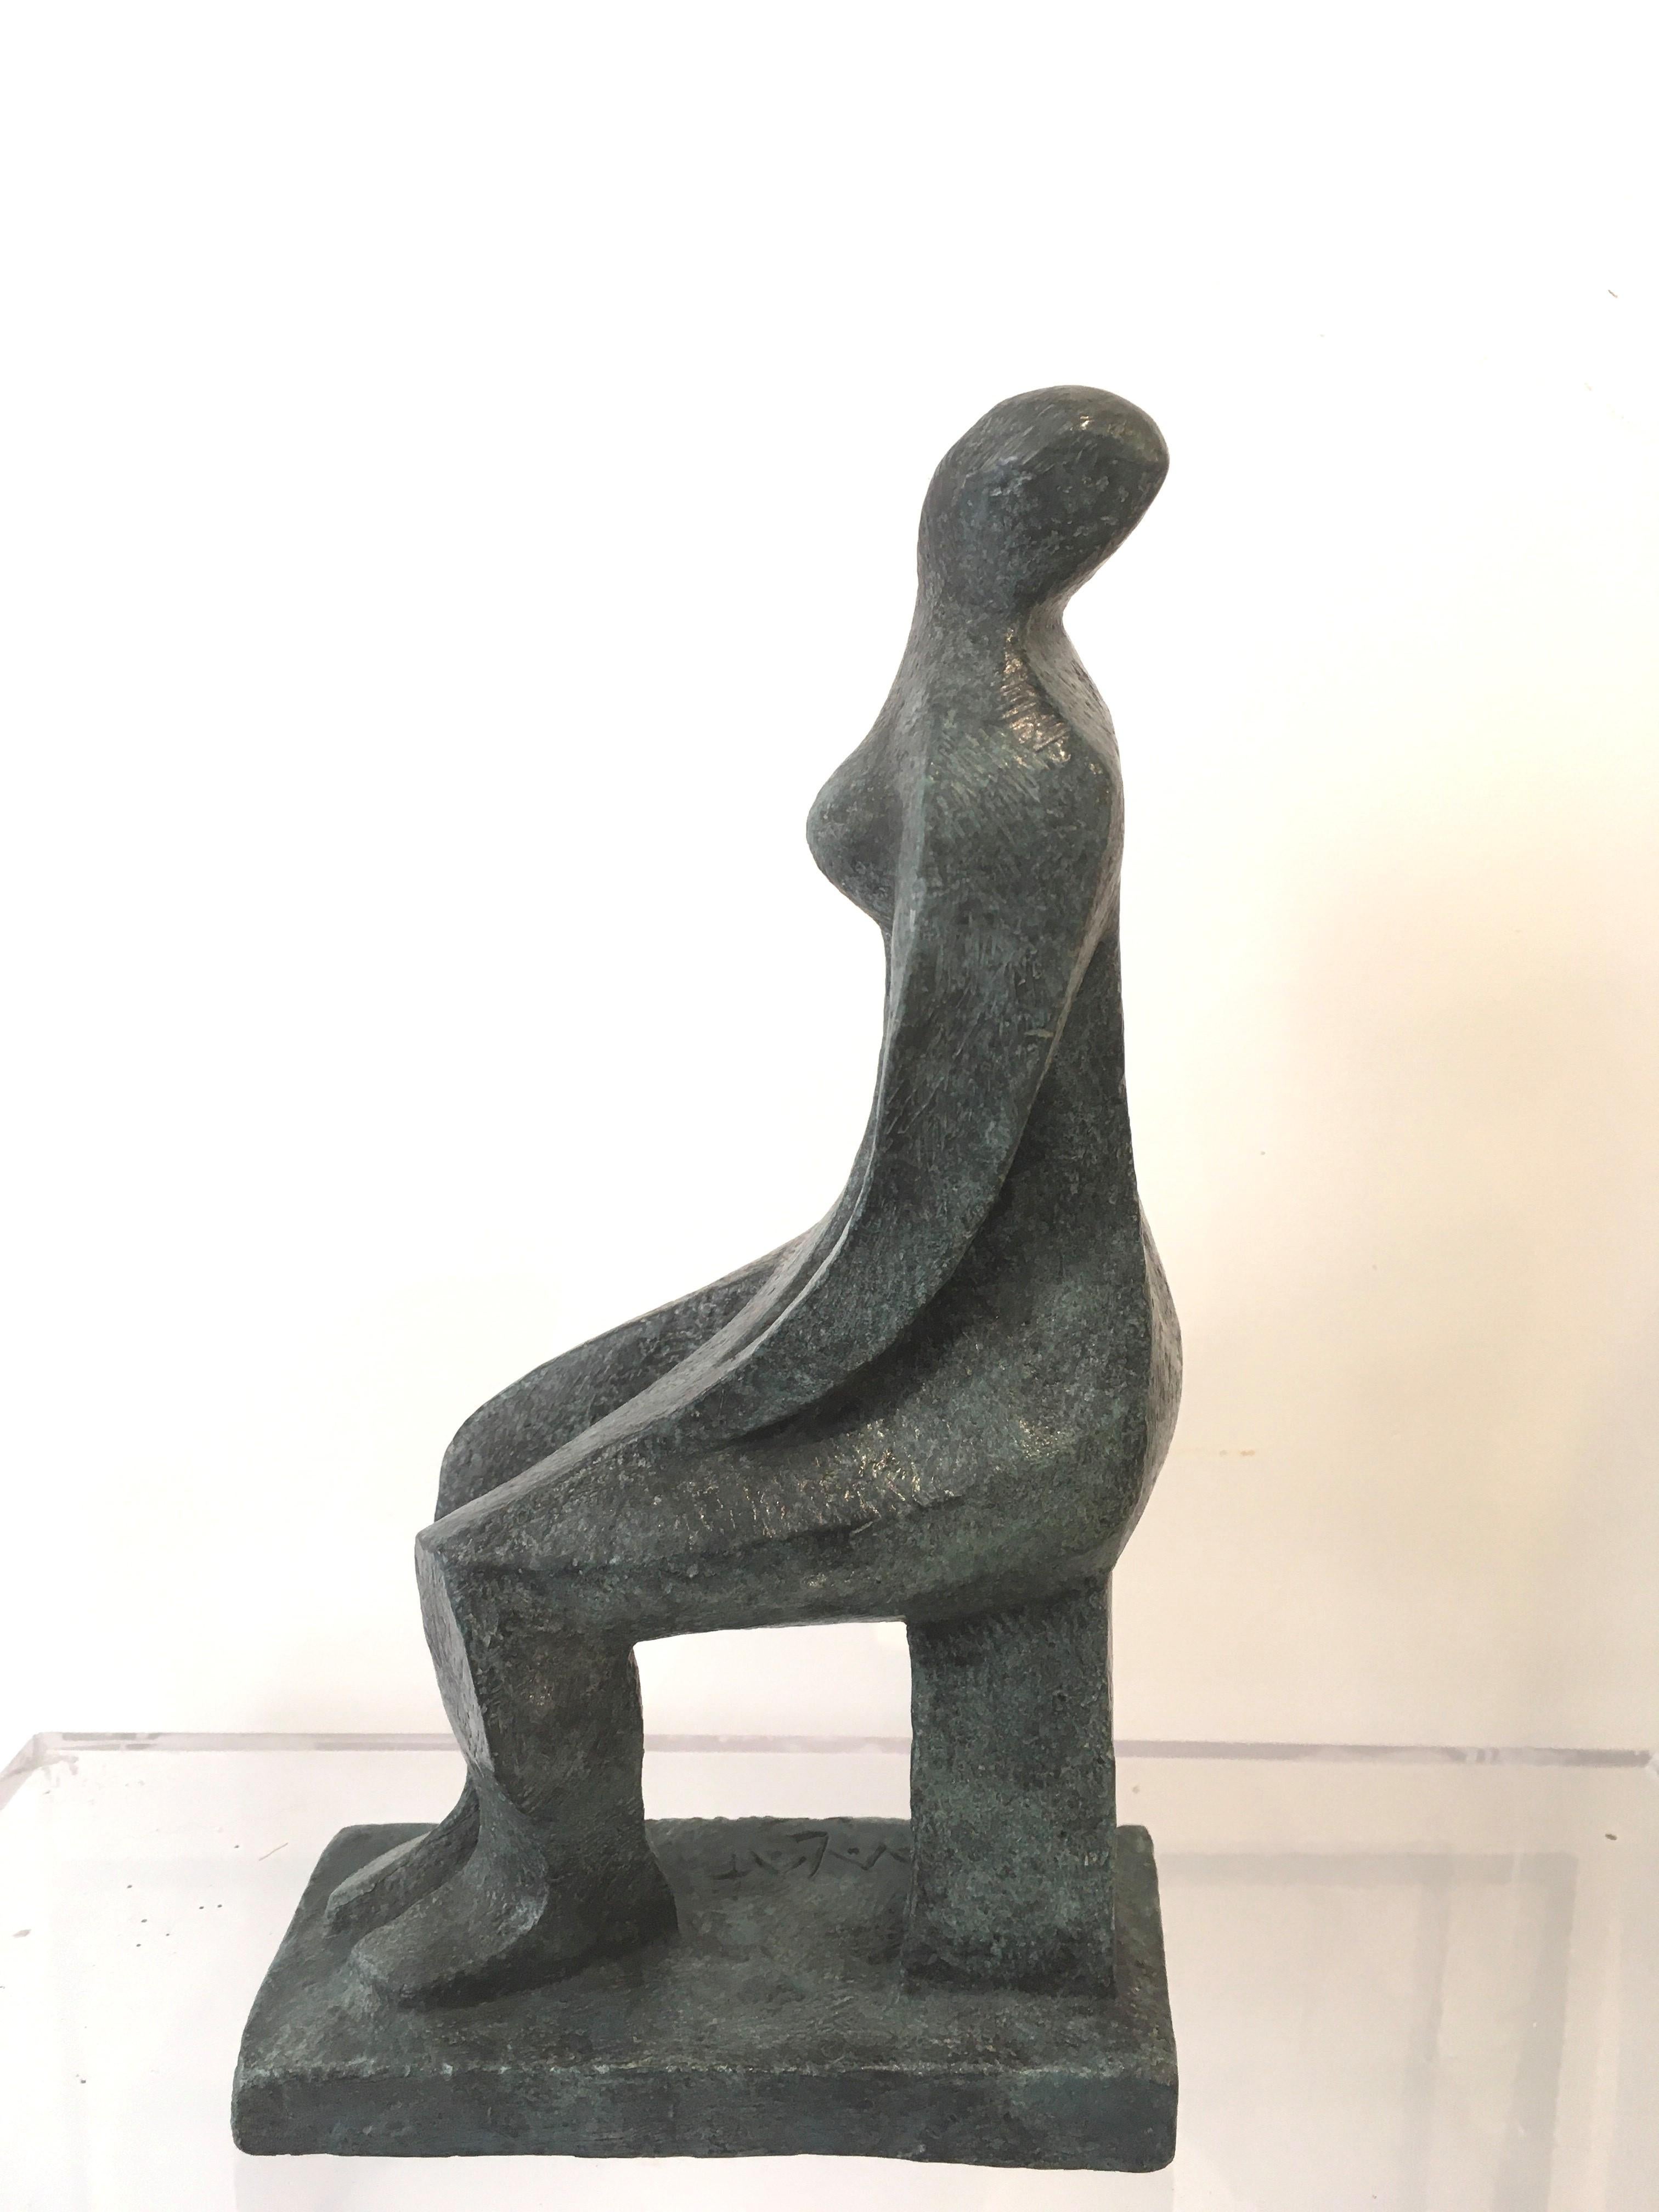 Bronze sculpture, antic green patina, 26 cm x 15 cm x 10 cm.
Limited edition of 8 + 4 artist’s proofs. 